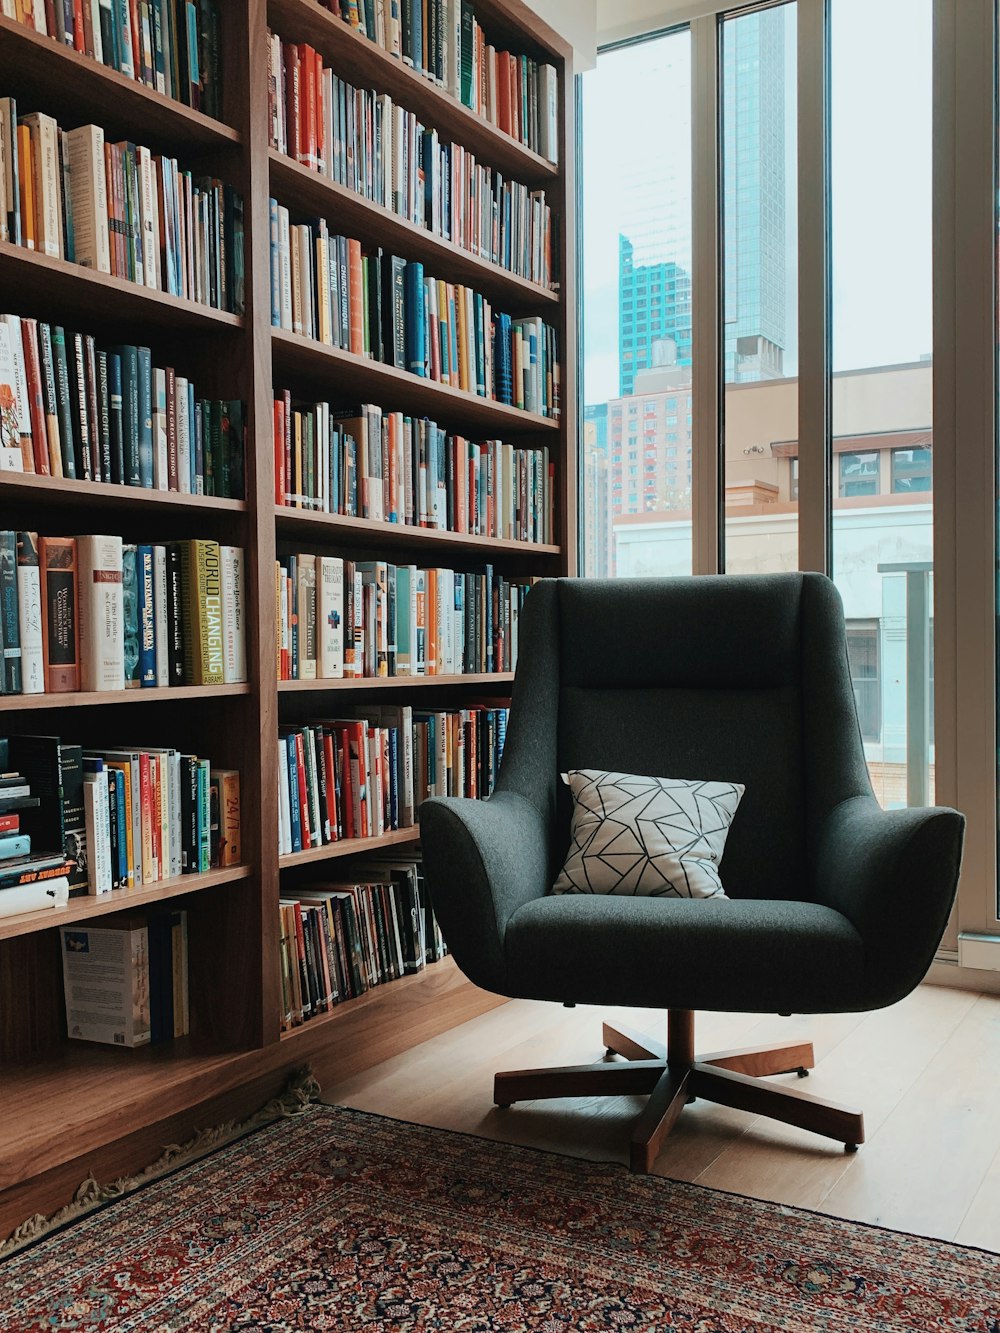 550+ Study Room Pictures | Download Free Images on Unsplash